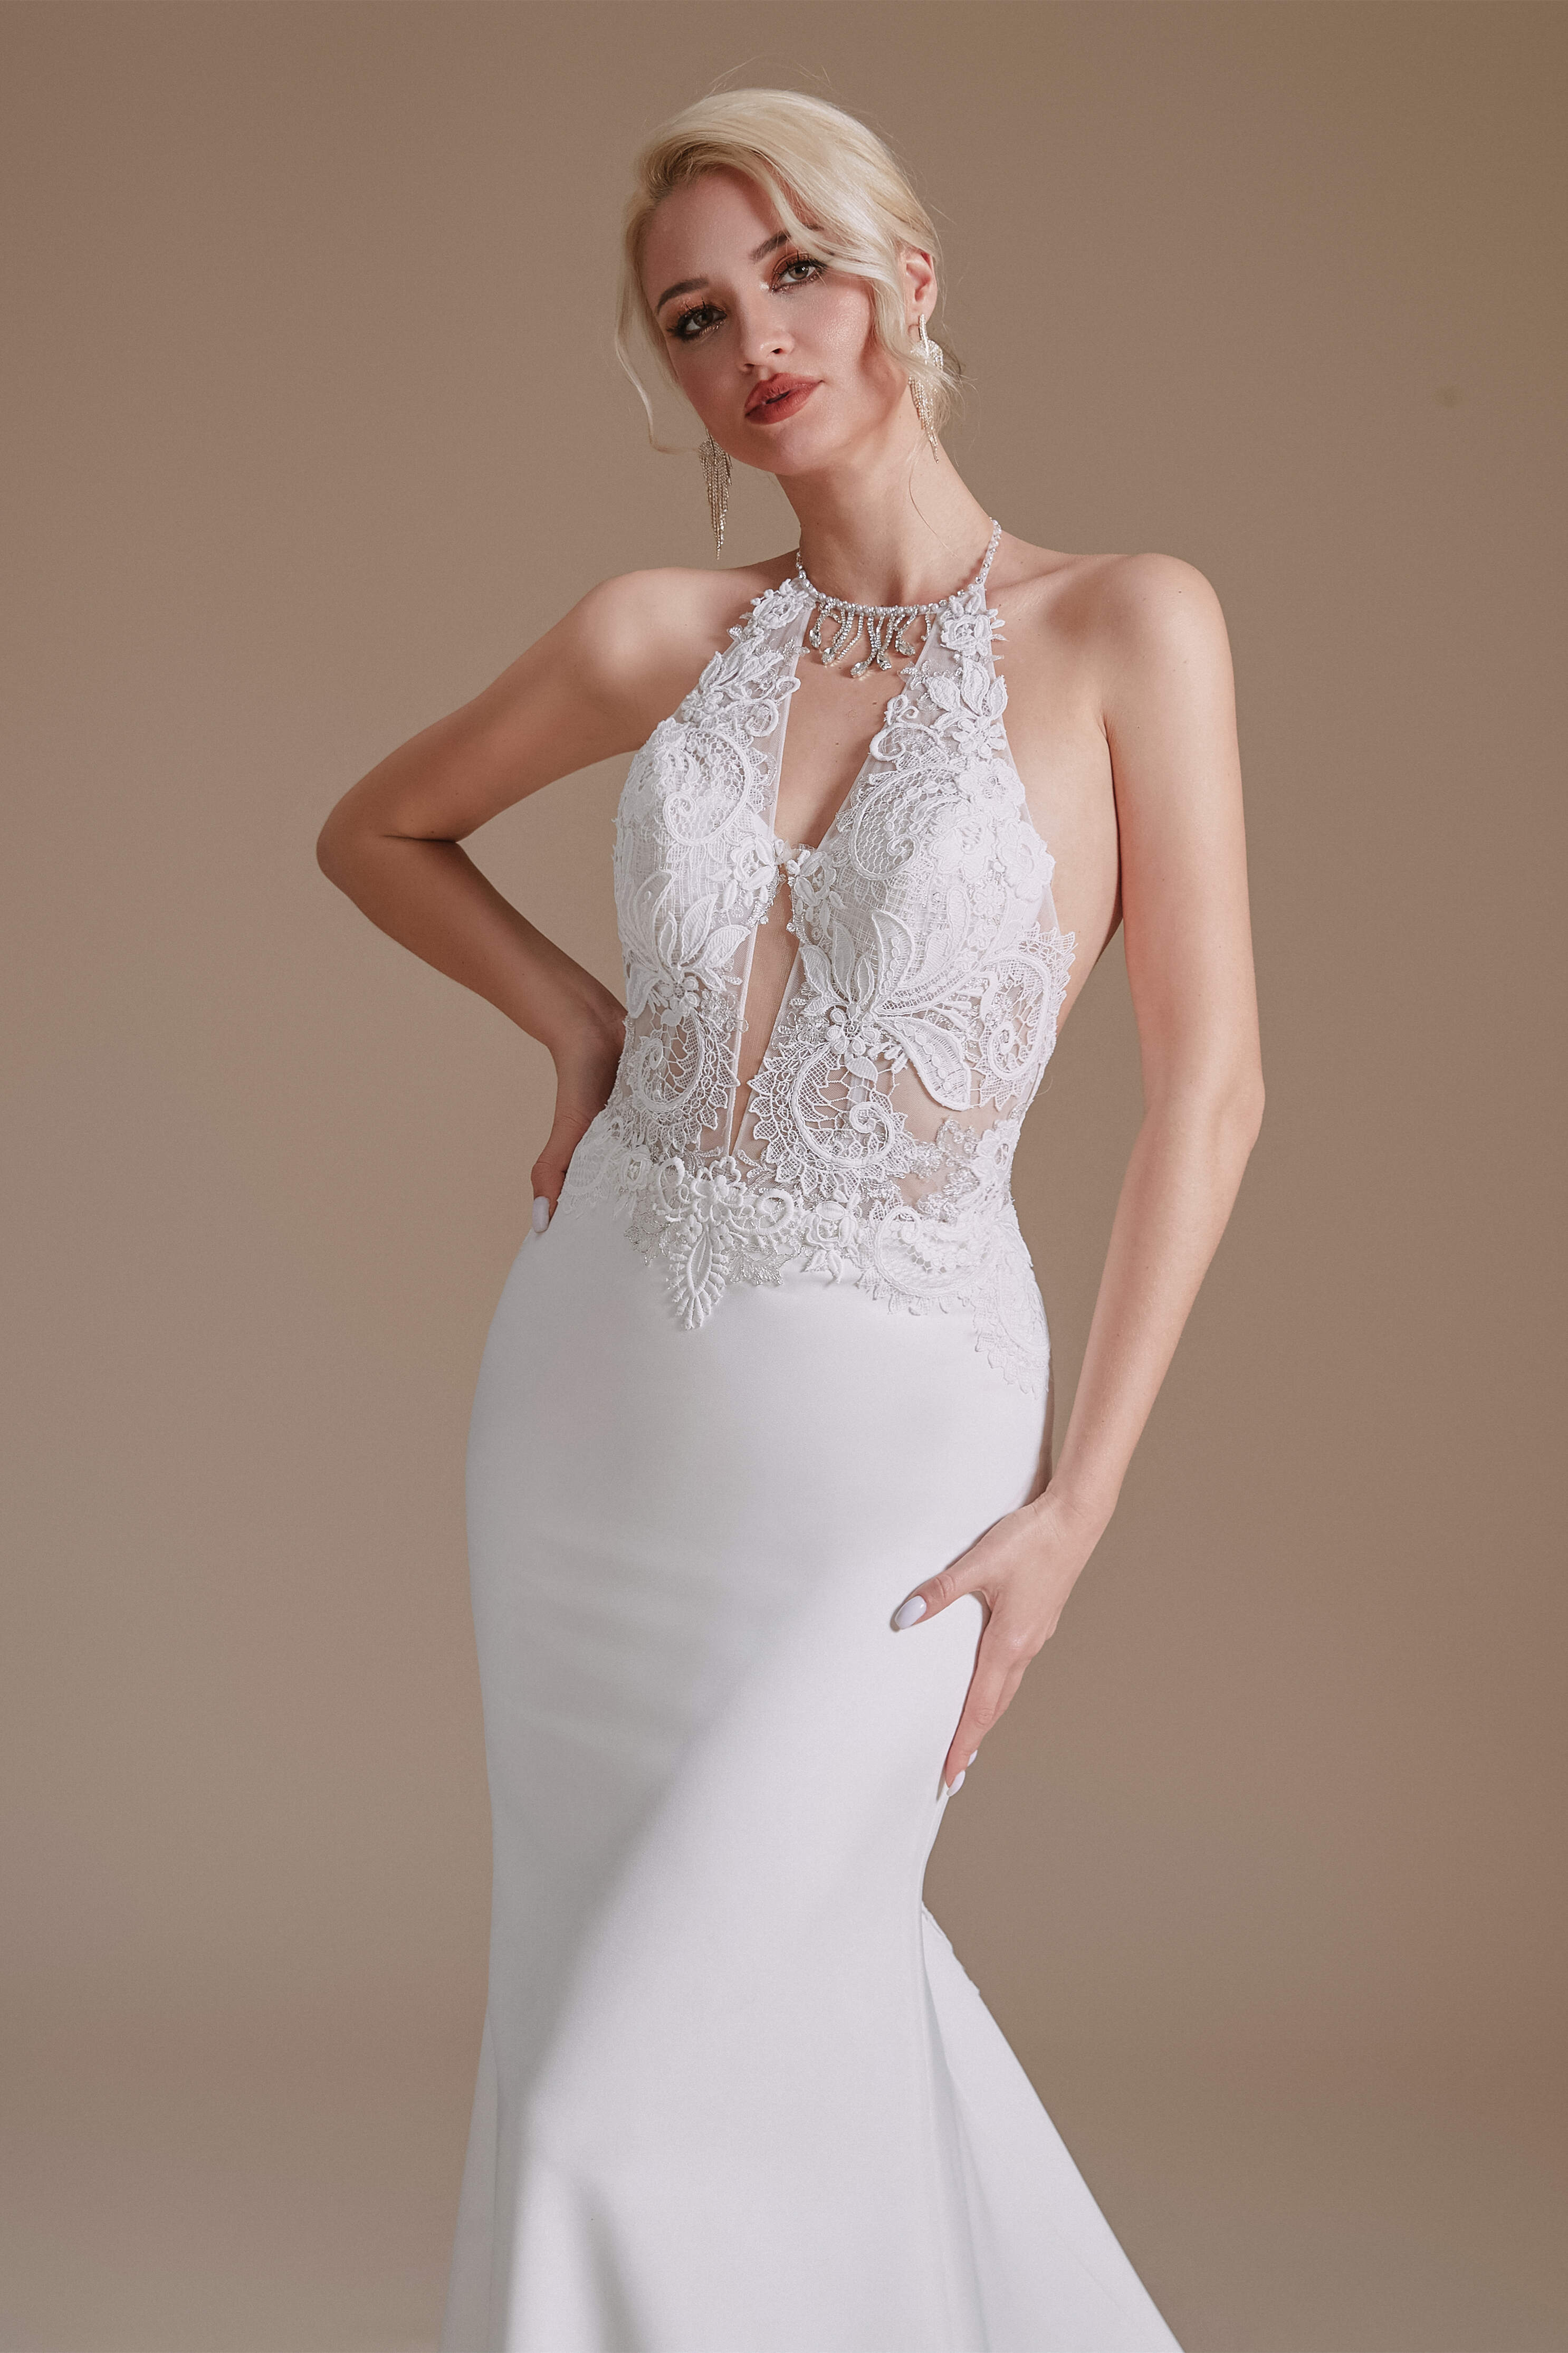 White Mermaid Halter Backless Sweep Train Corset Wedding Dresses with Lace Outfits, Wedding Dress Classy